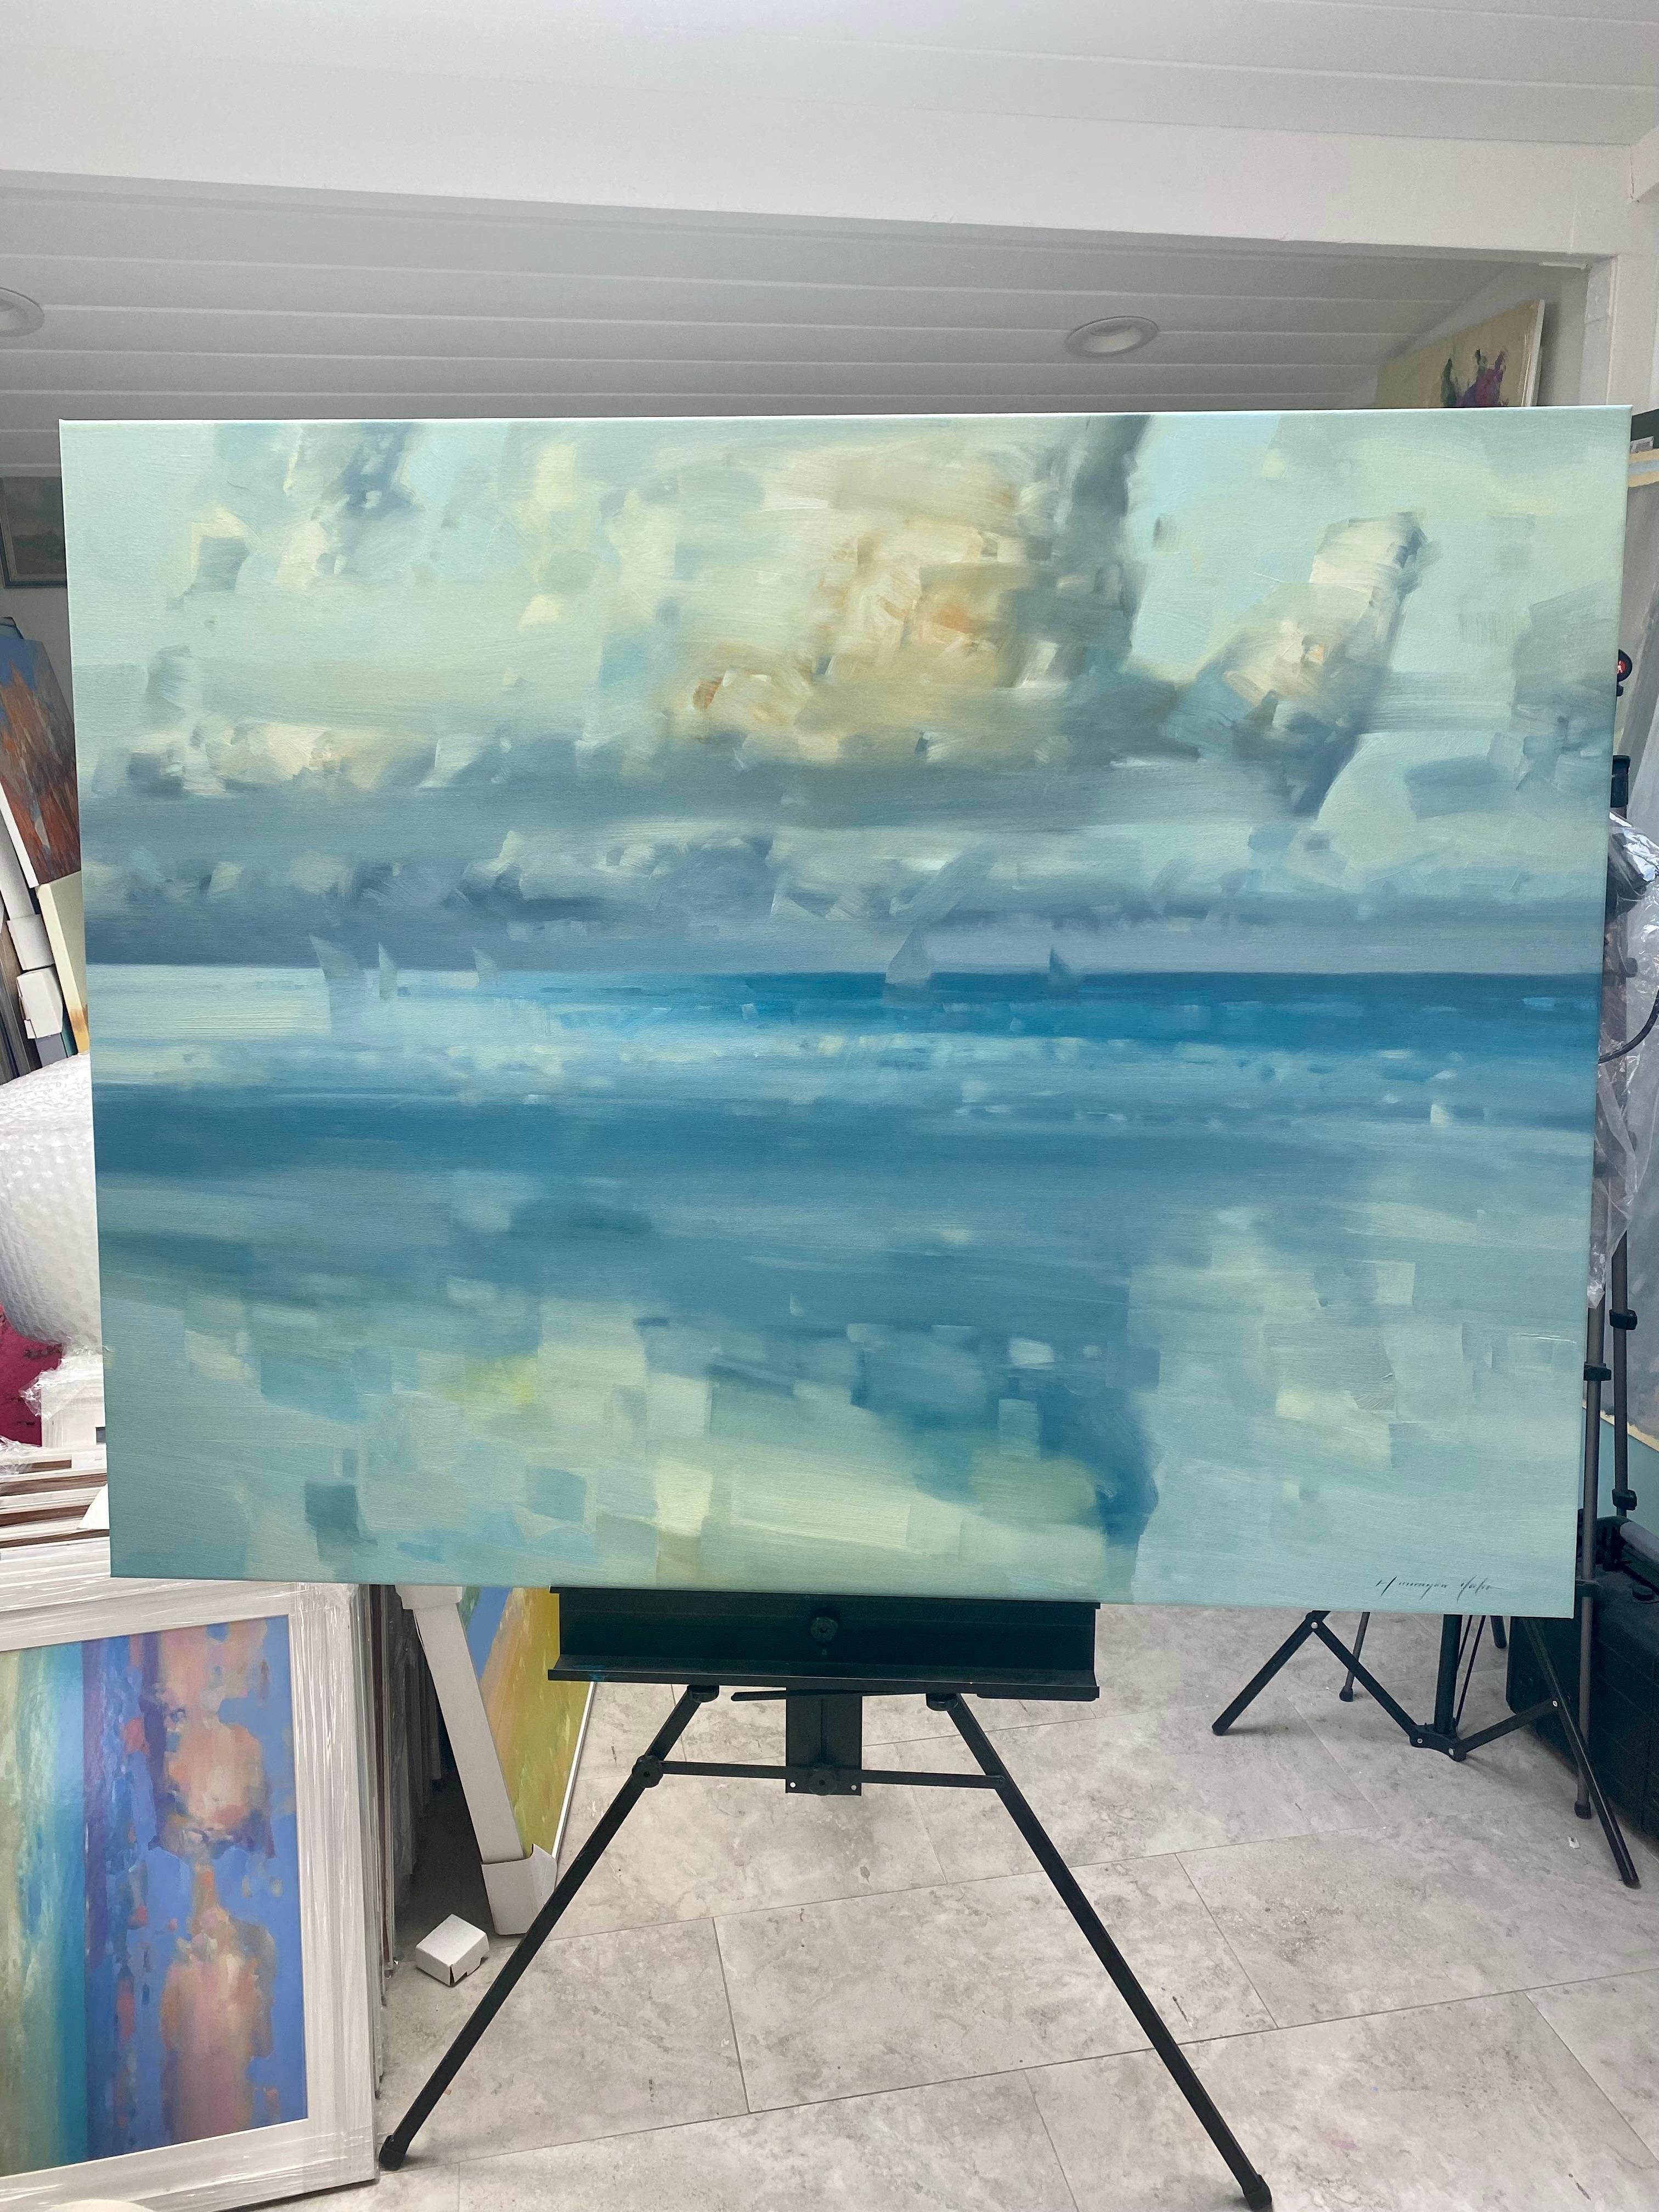 Reflection, Seascape, Original Oil Painting, Handmade, Ready to Hang For Sale 2